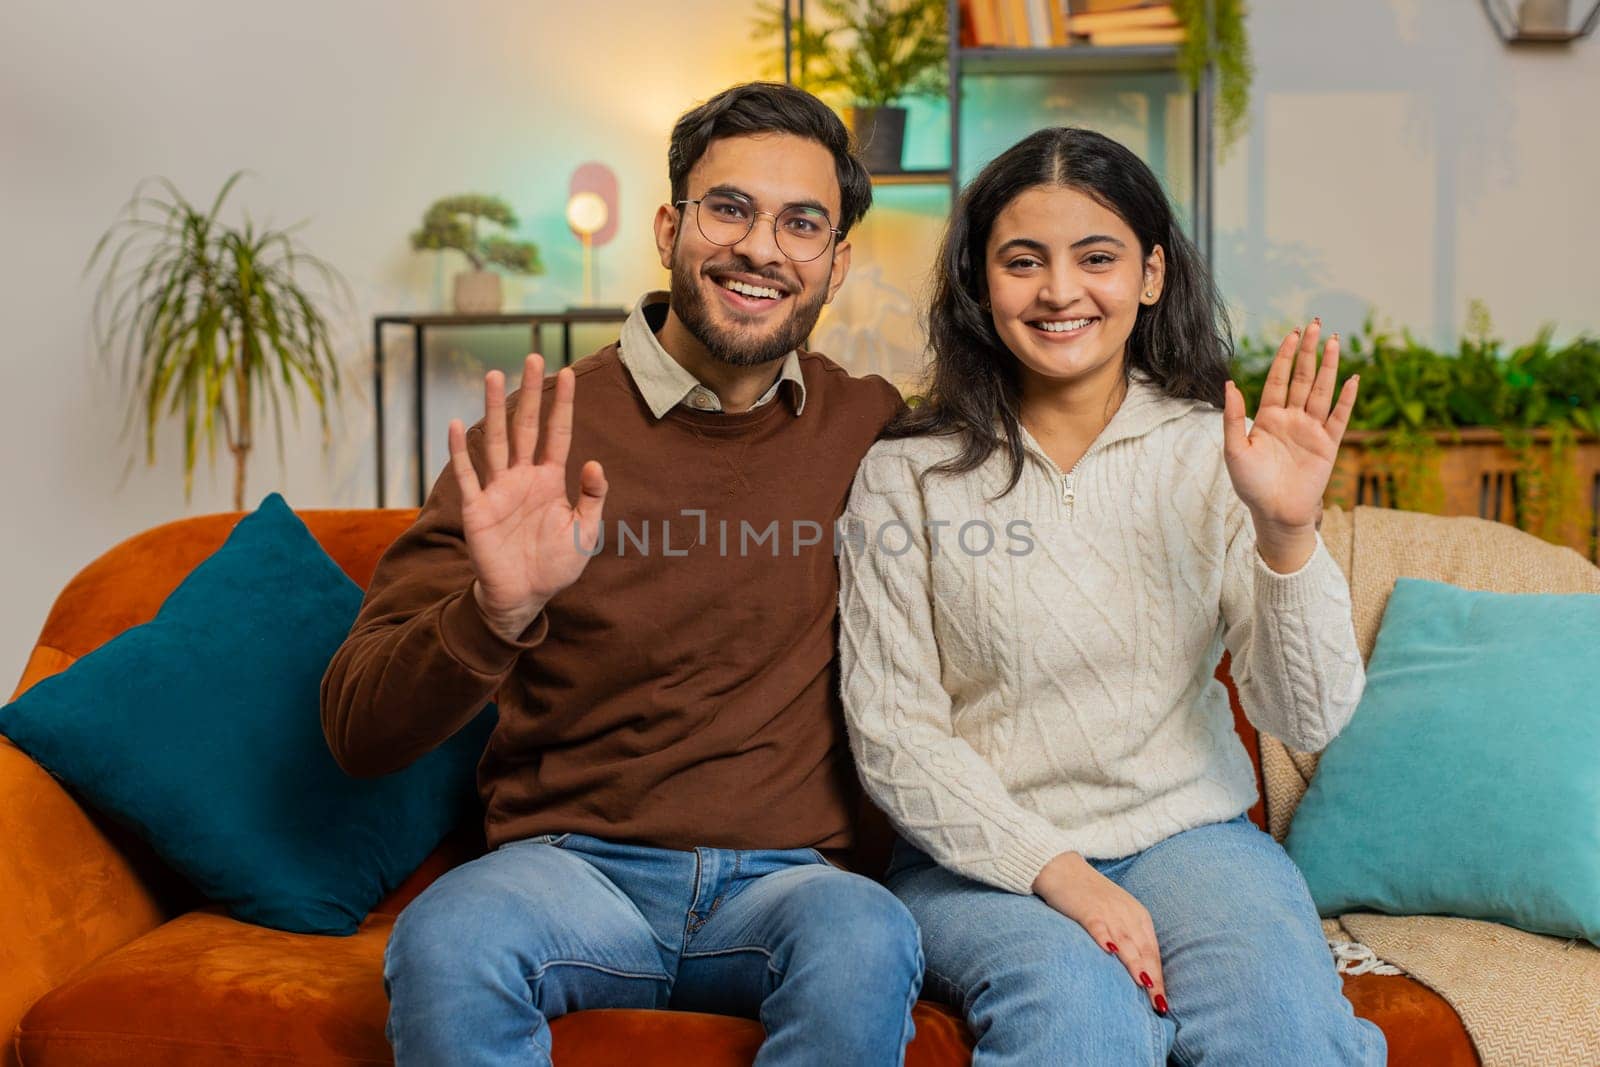 Portrait of smiling young diverse couple smiling at camera and waving gesturing hello, hi, greeting or goodbye. Relaxed family sitting arm around relaxing together on couch in living room at home.